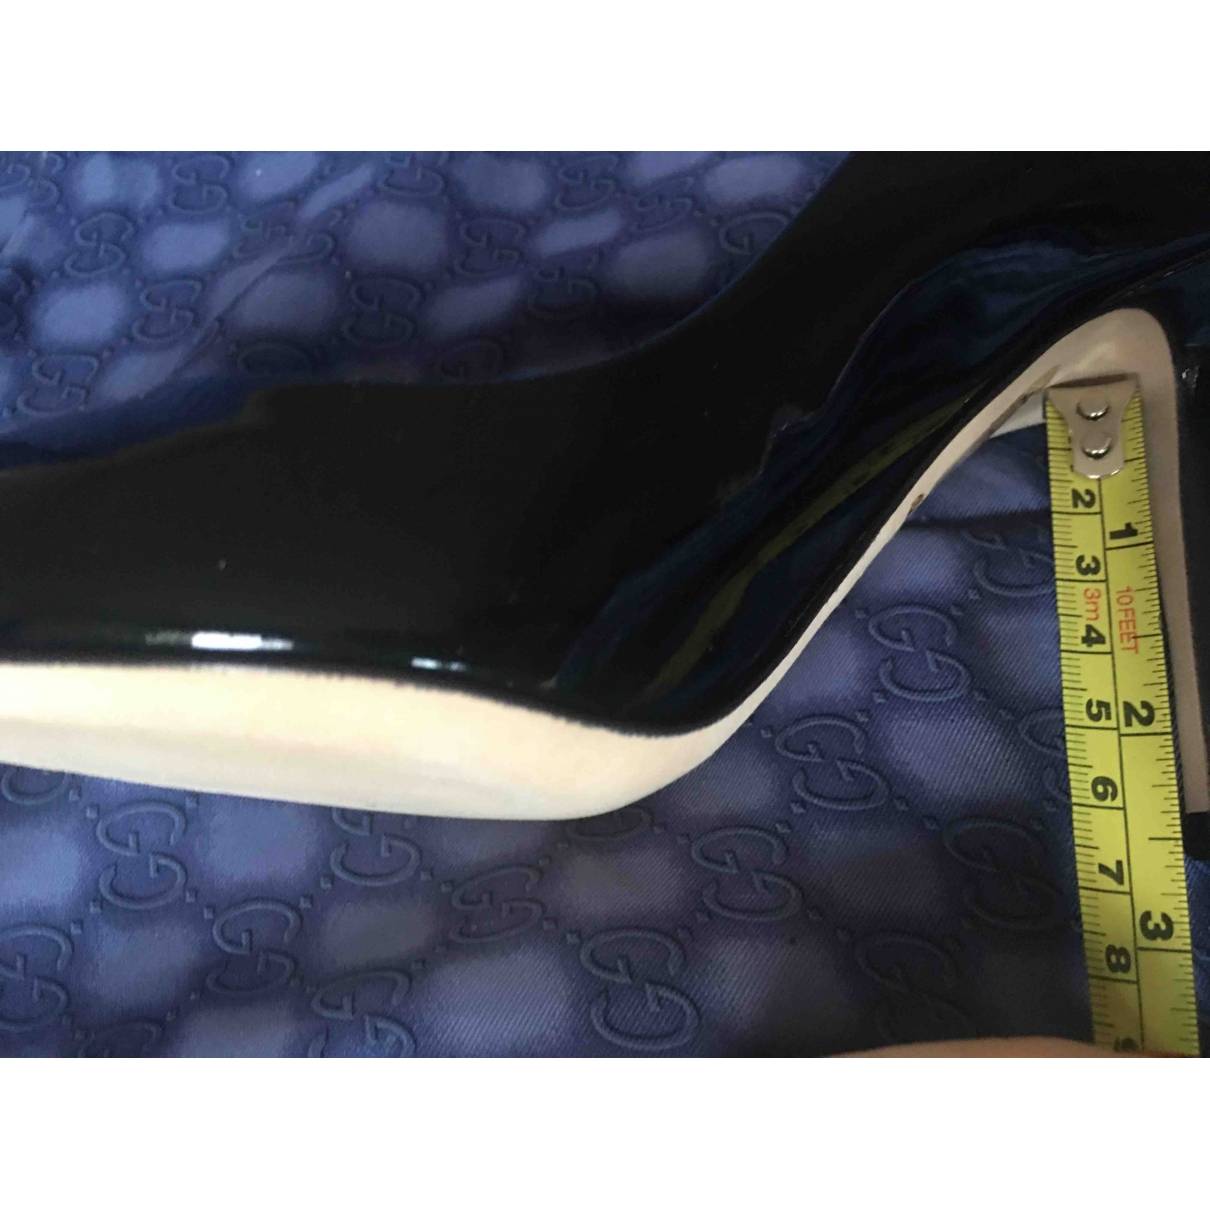 Dolce & Gabbana Patent leather heels for sale